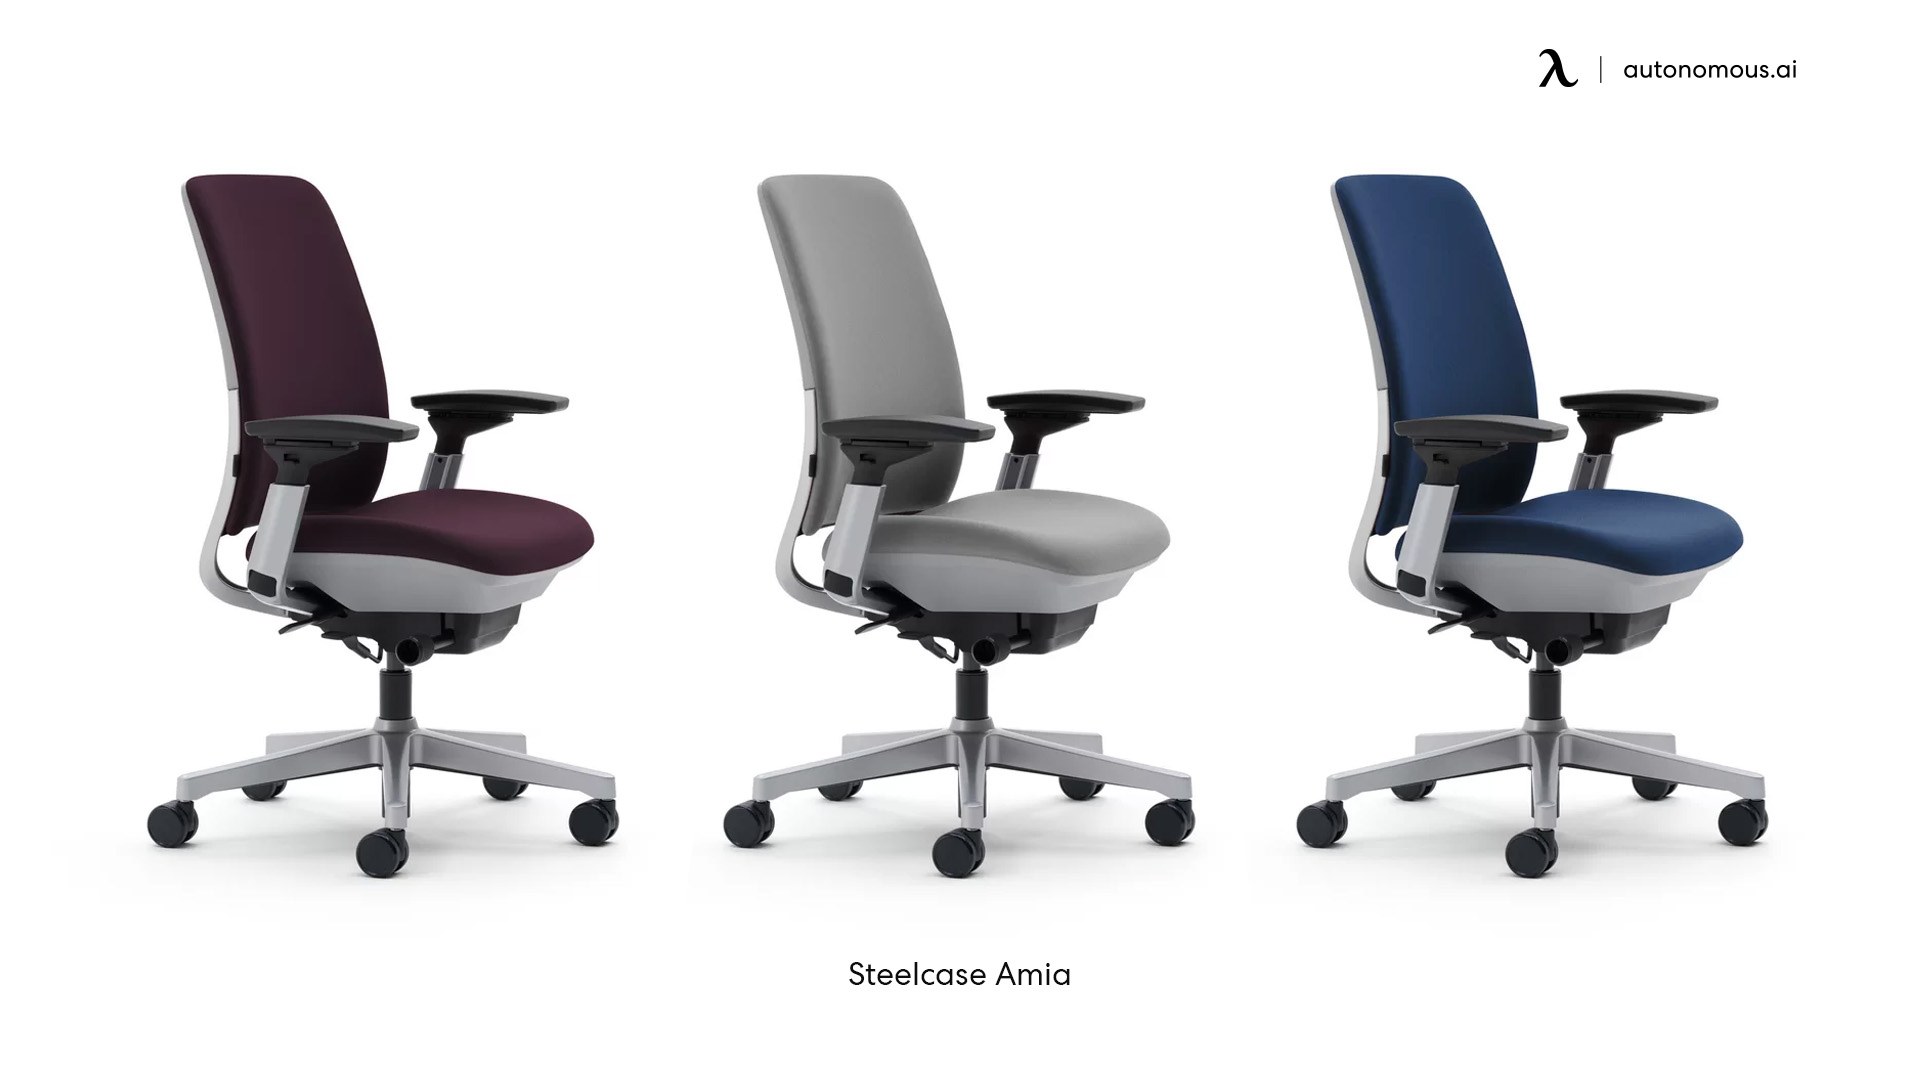 Steelcase Amia affordable office chairs